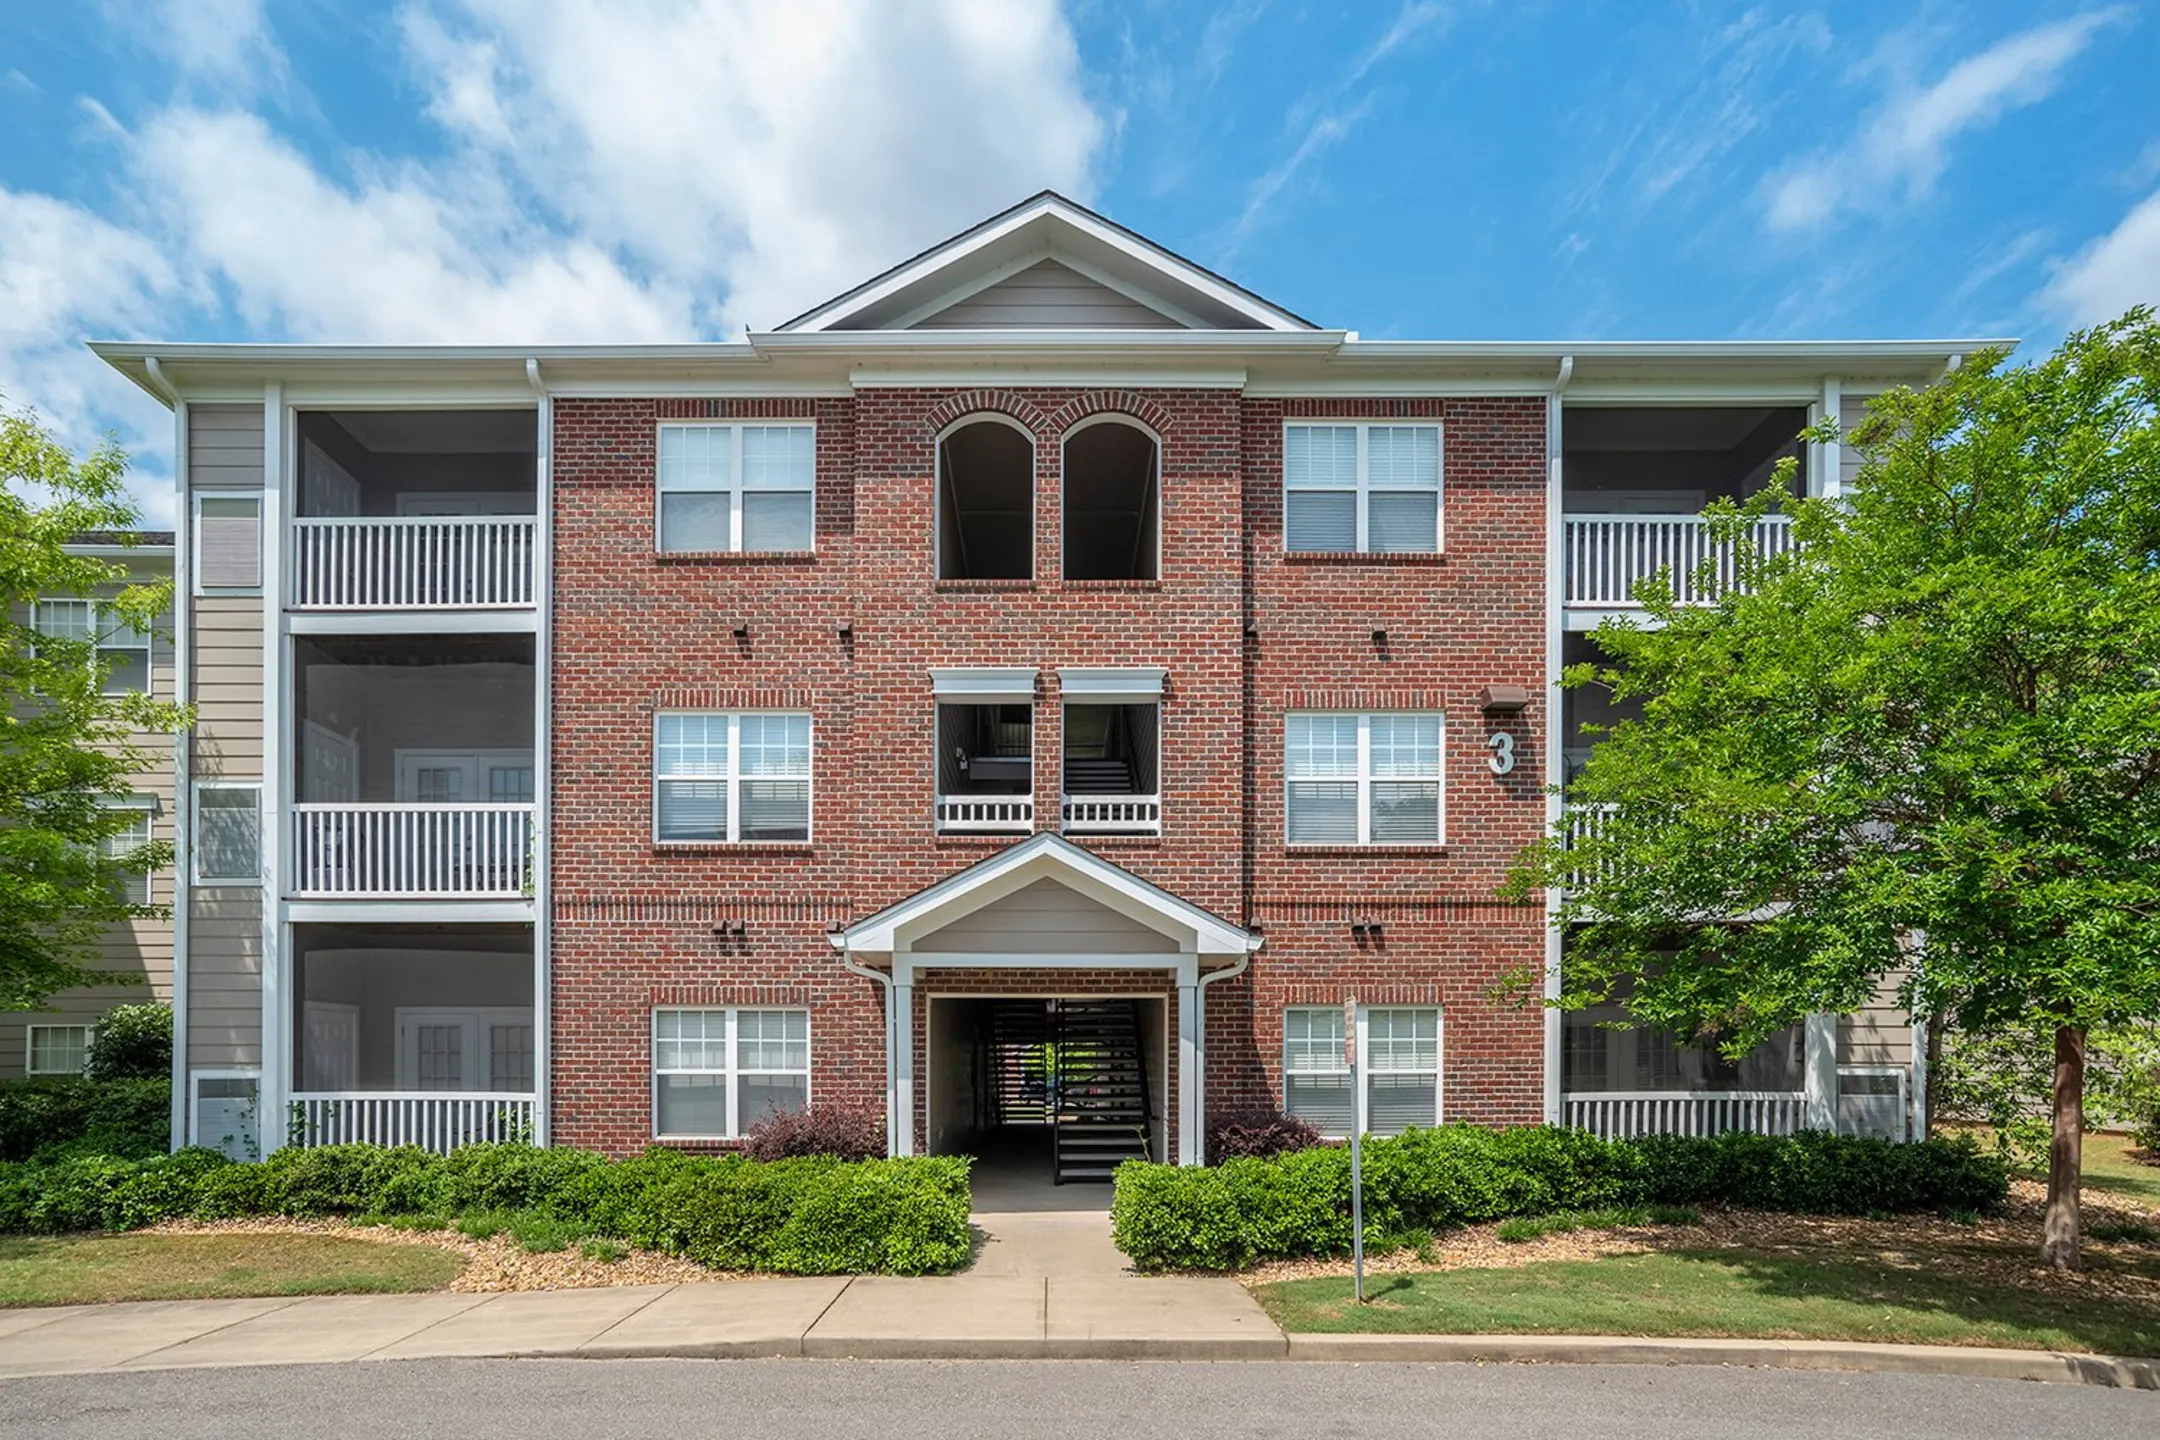 Building - Broadstreet At EastChase Apartments - Montgomery, AL